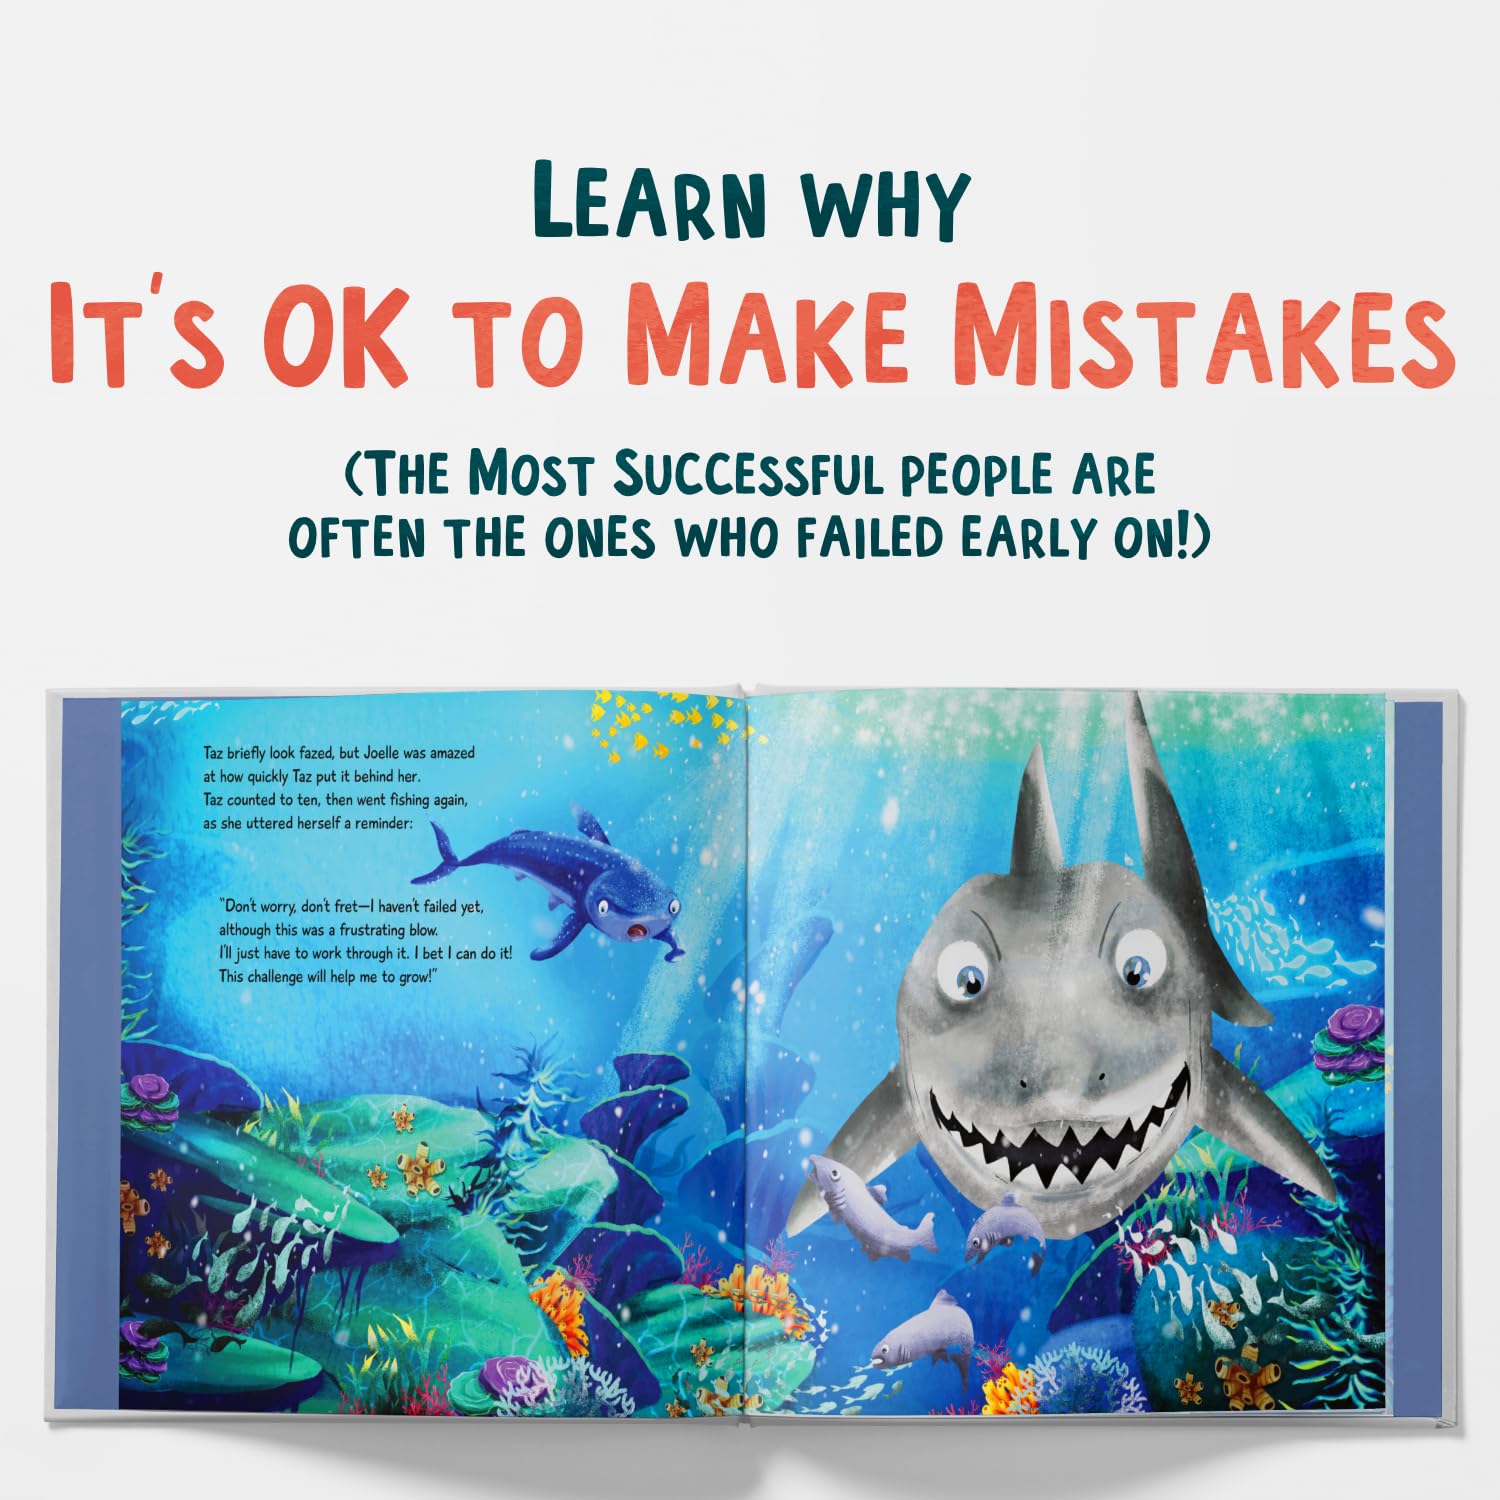 Growth Mindset - Joelle the Whale Shark Grew and Grew - a Younger Me Academy book